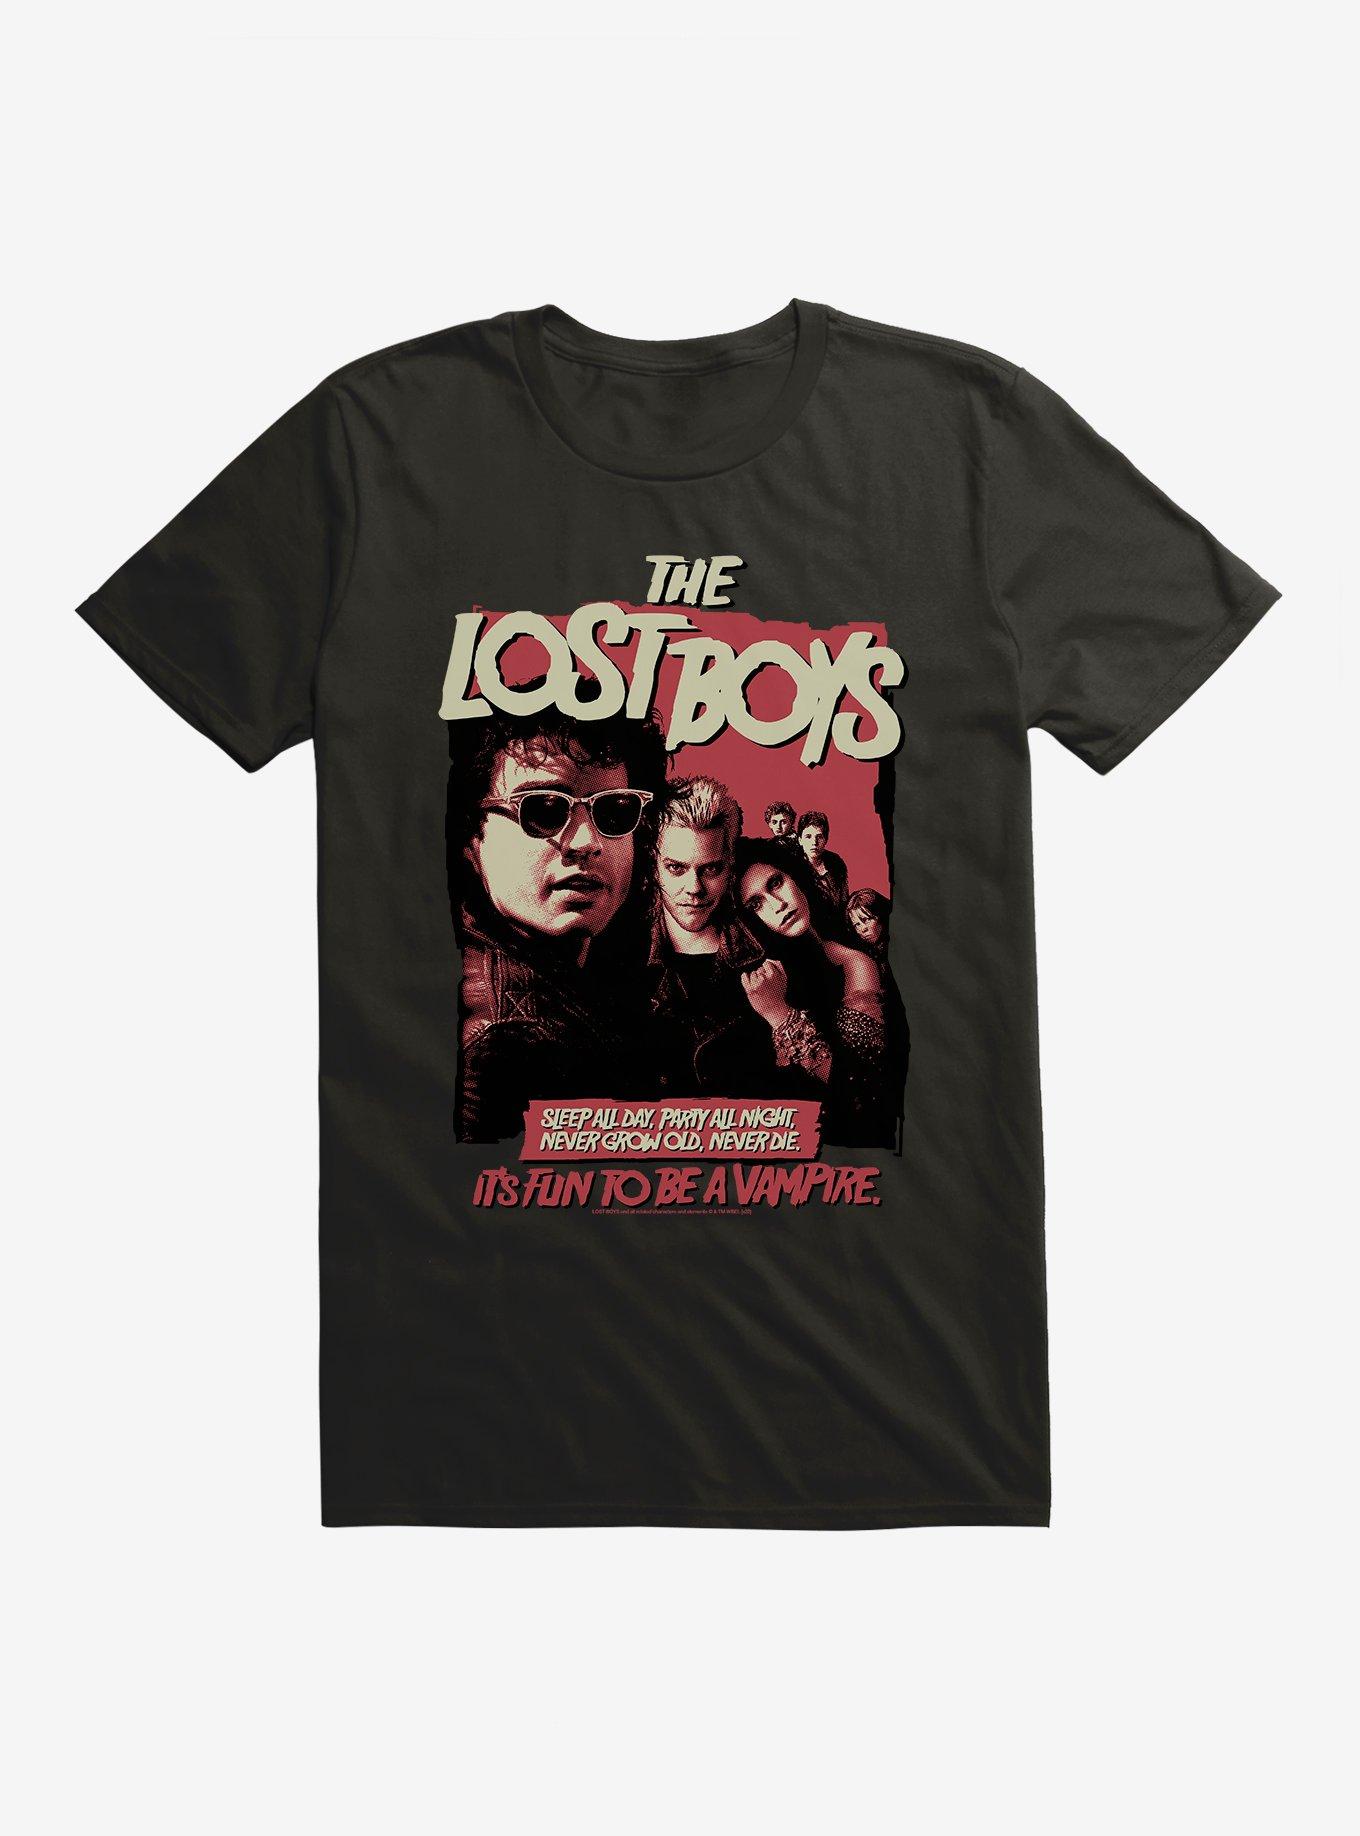 The Lost Boys Fun To Be A Vampire Extra Soft T-Shirt, BLACK, hi-res